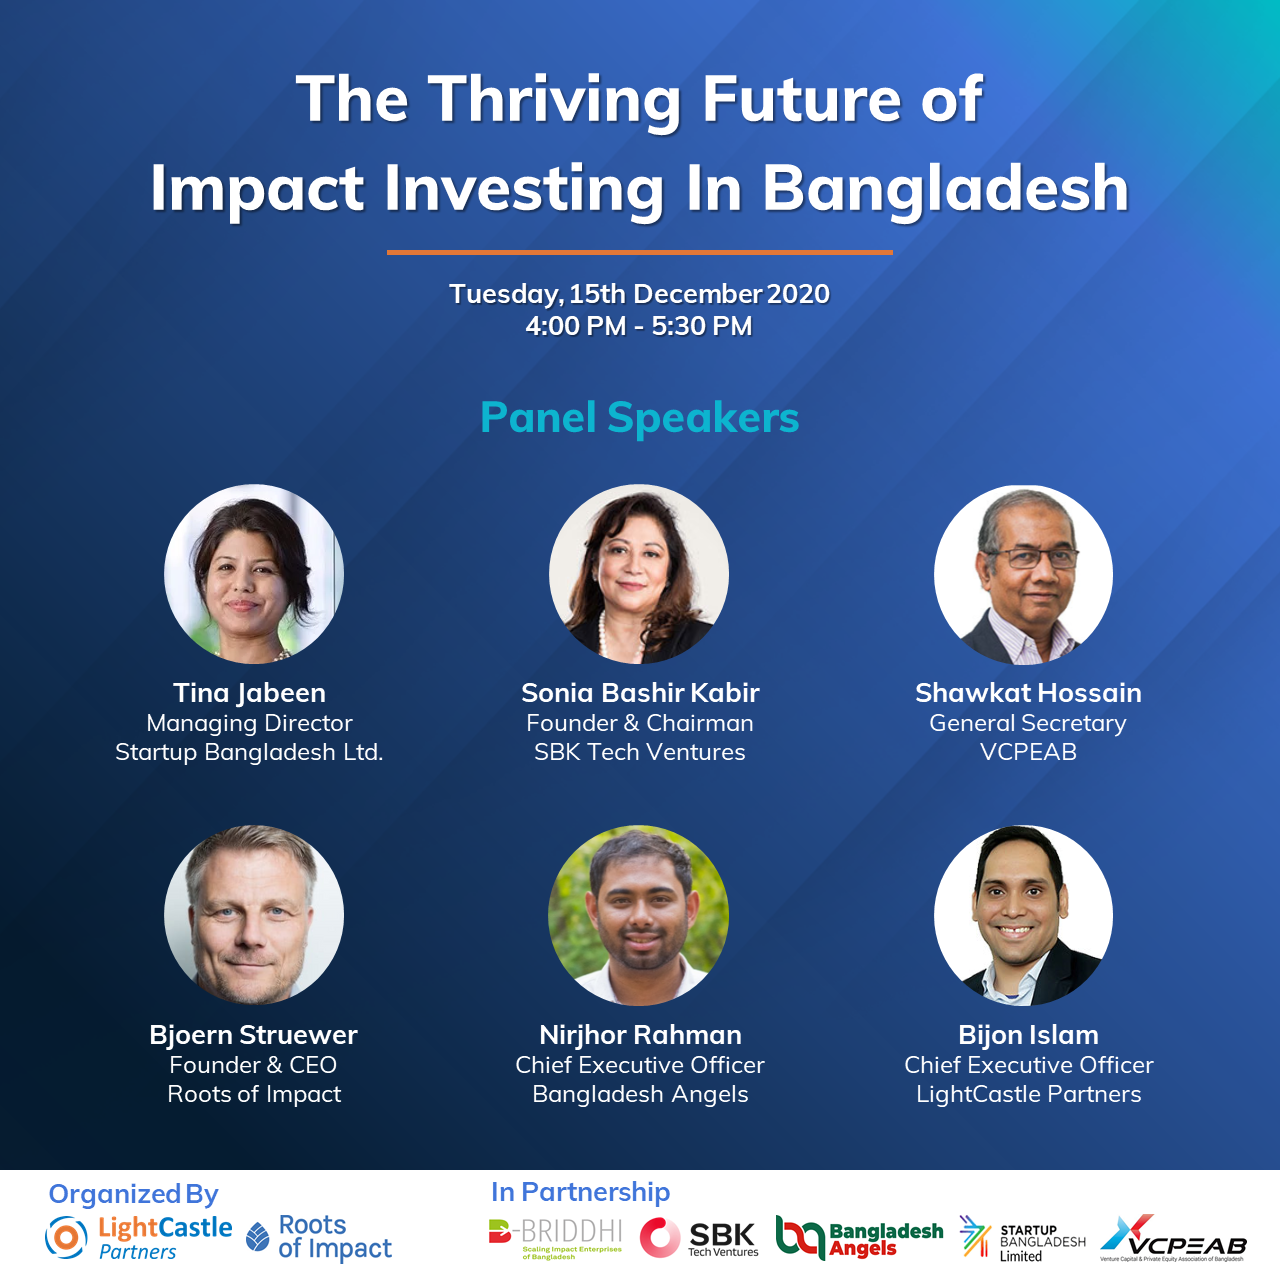 The Thriving Future of Impact Investment in Bangladesh